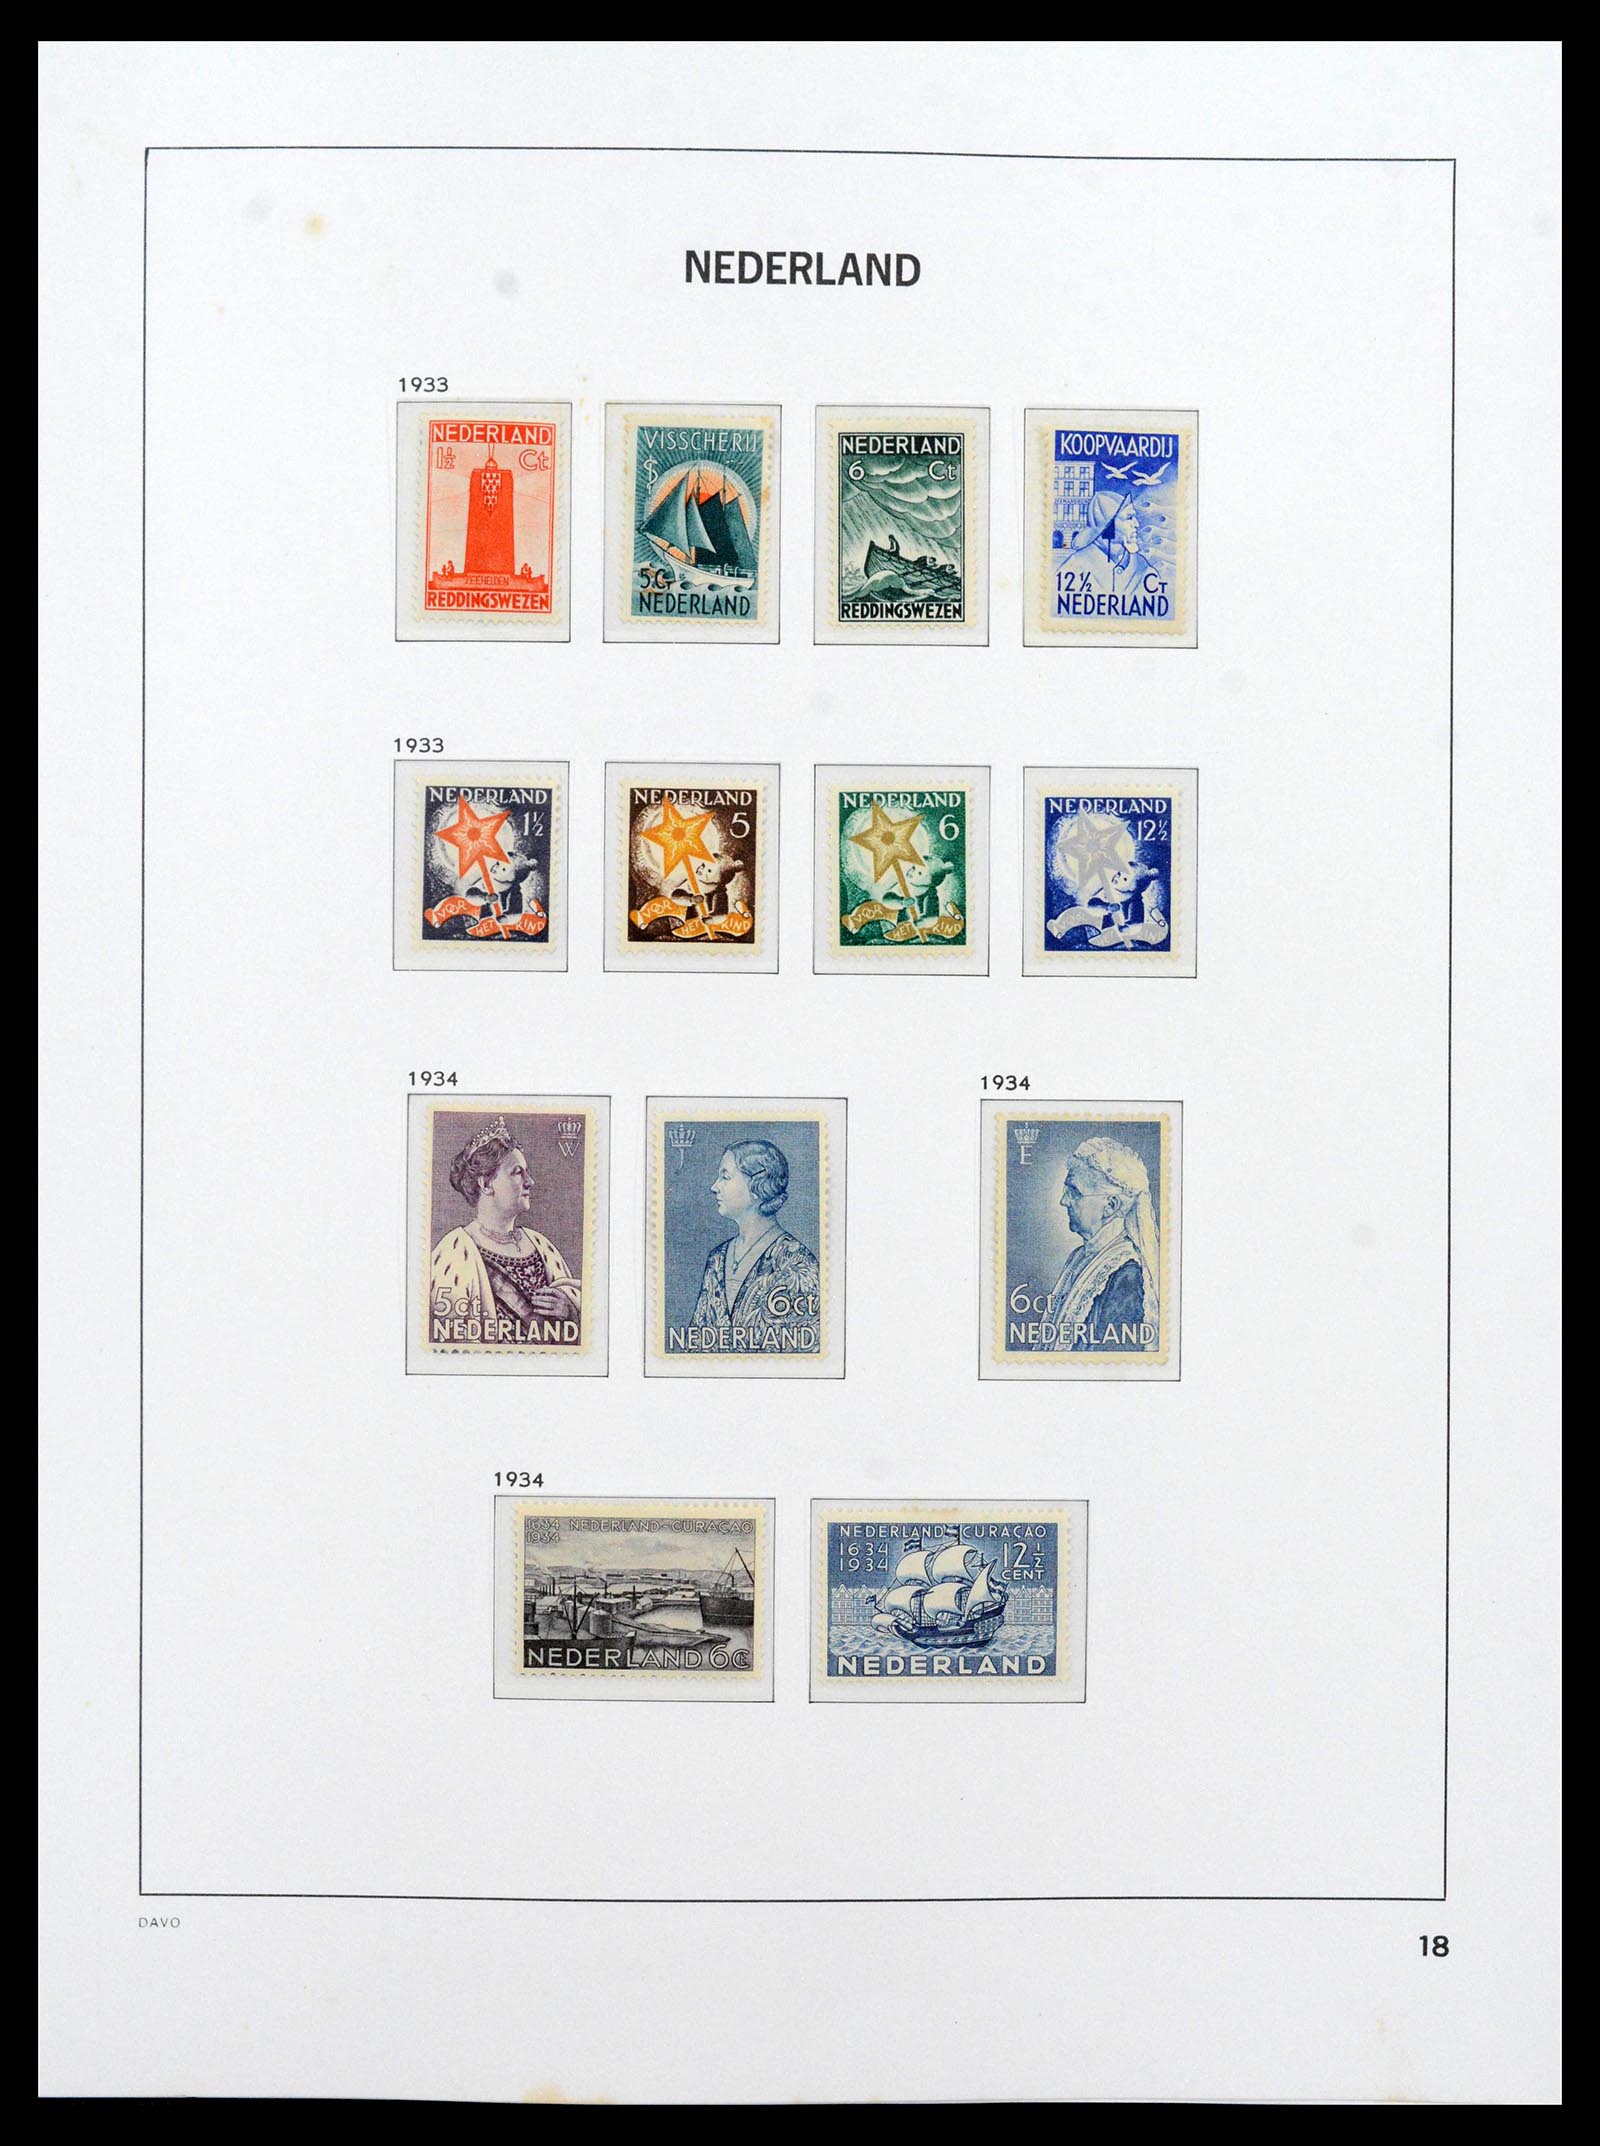 39035 0018 - Stamp collection 39035 Netherlands 1852-1968.